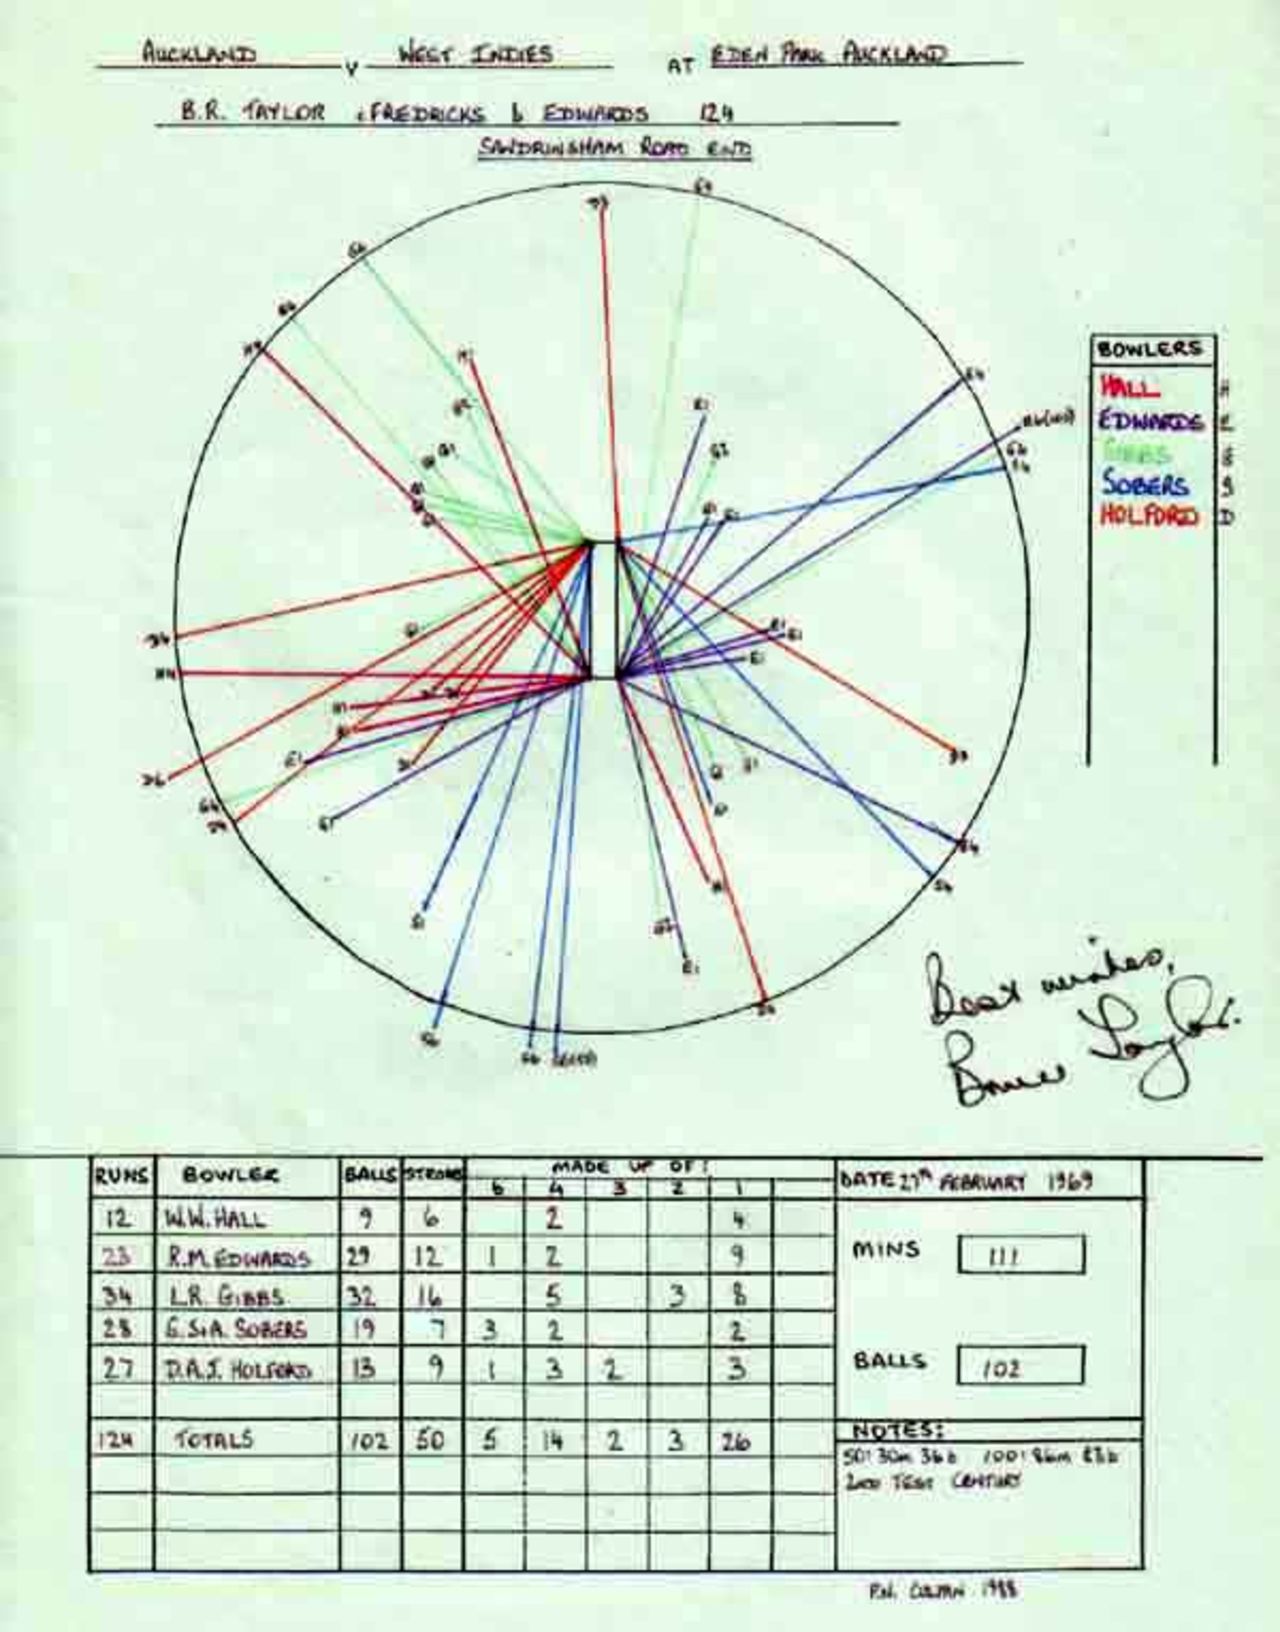 Wagon Wheel of Bruce Taylor's 124 v West Indies, Eden Park, Auckland 27th February 1969